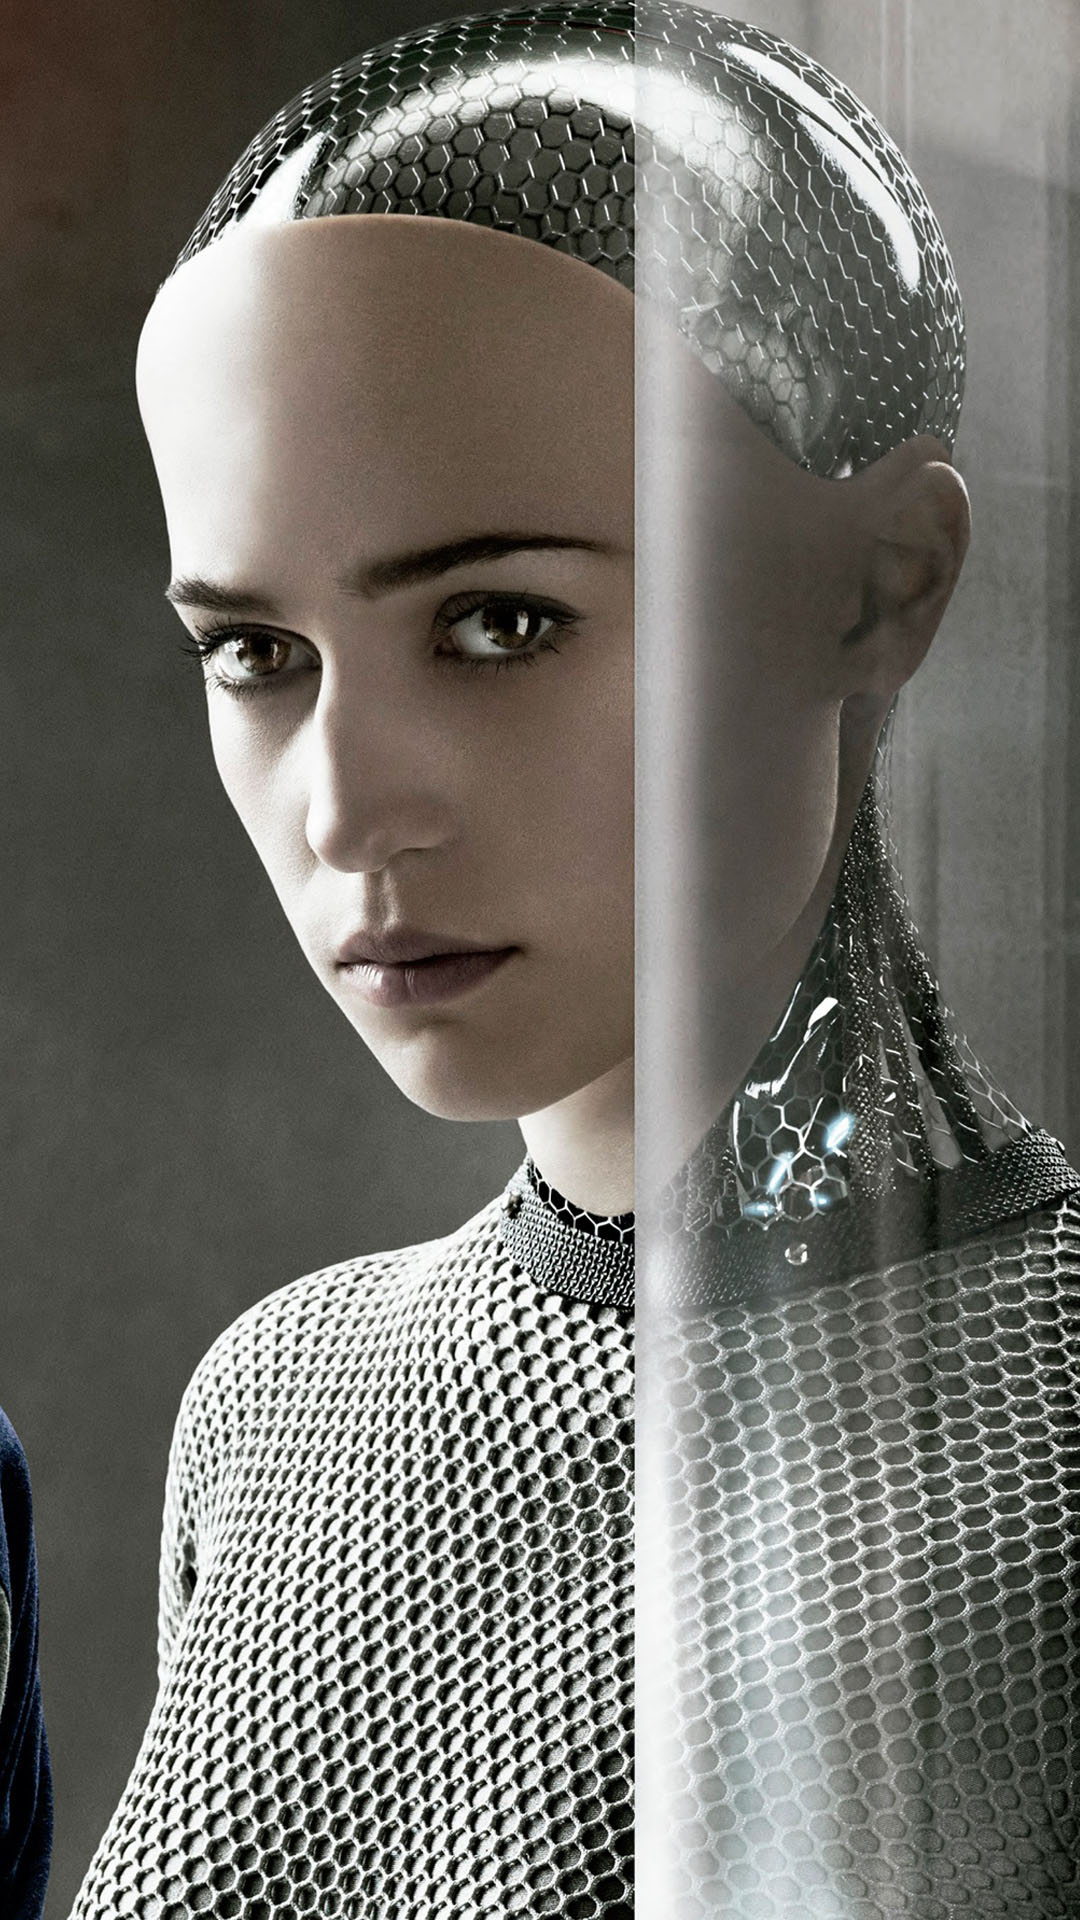 Free Download Ex Machina Ava Female Robot Iphone 6 Plus Hd Images, Photos, Reviews